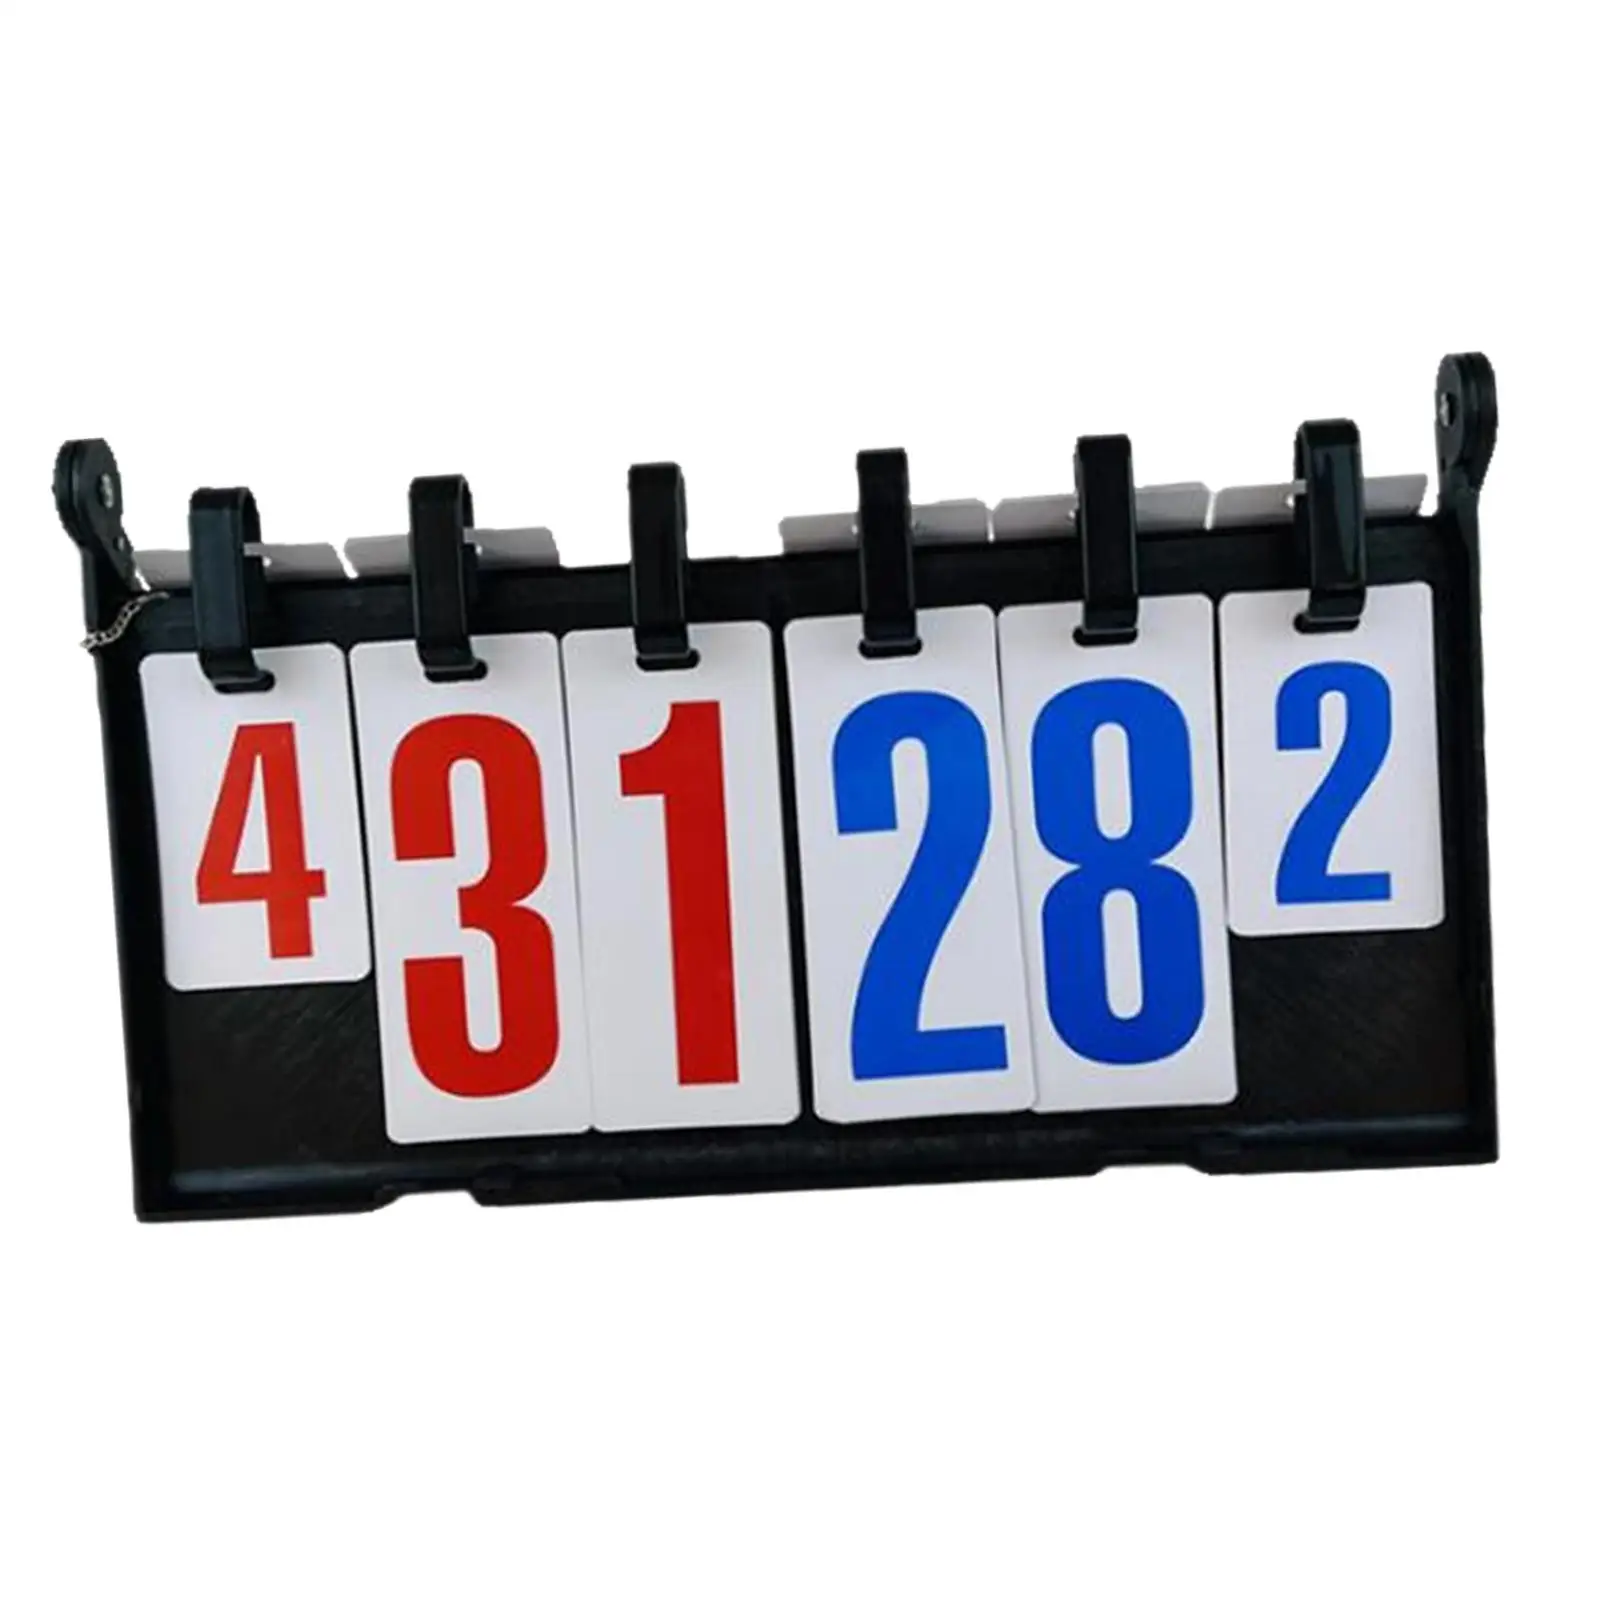 Tabletop Scoreboard 6 Digital Score Keeper Professional for Basketball Soccer Team Games Indoor Outdoor Sports Volleyball